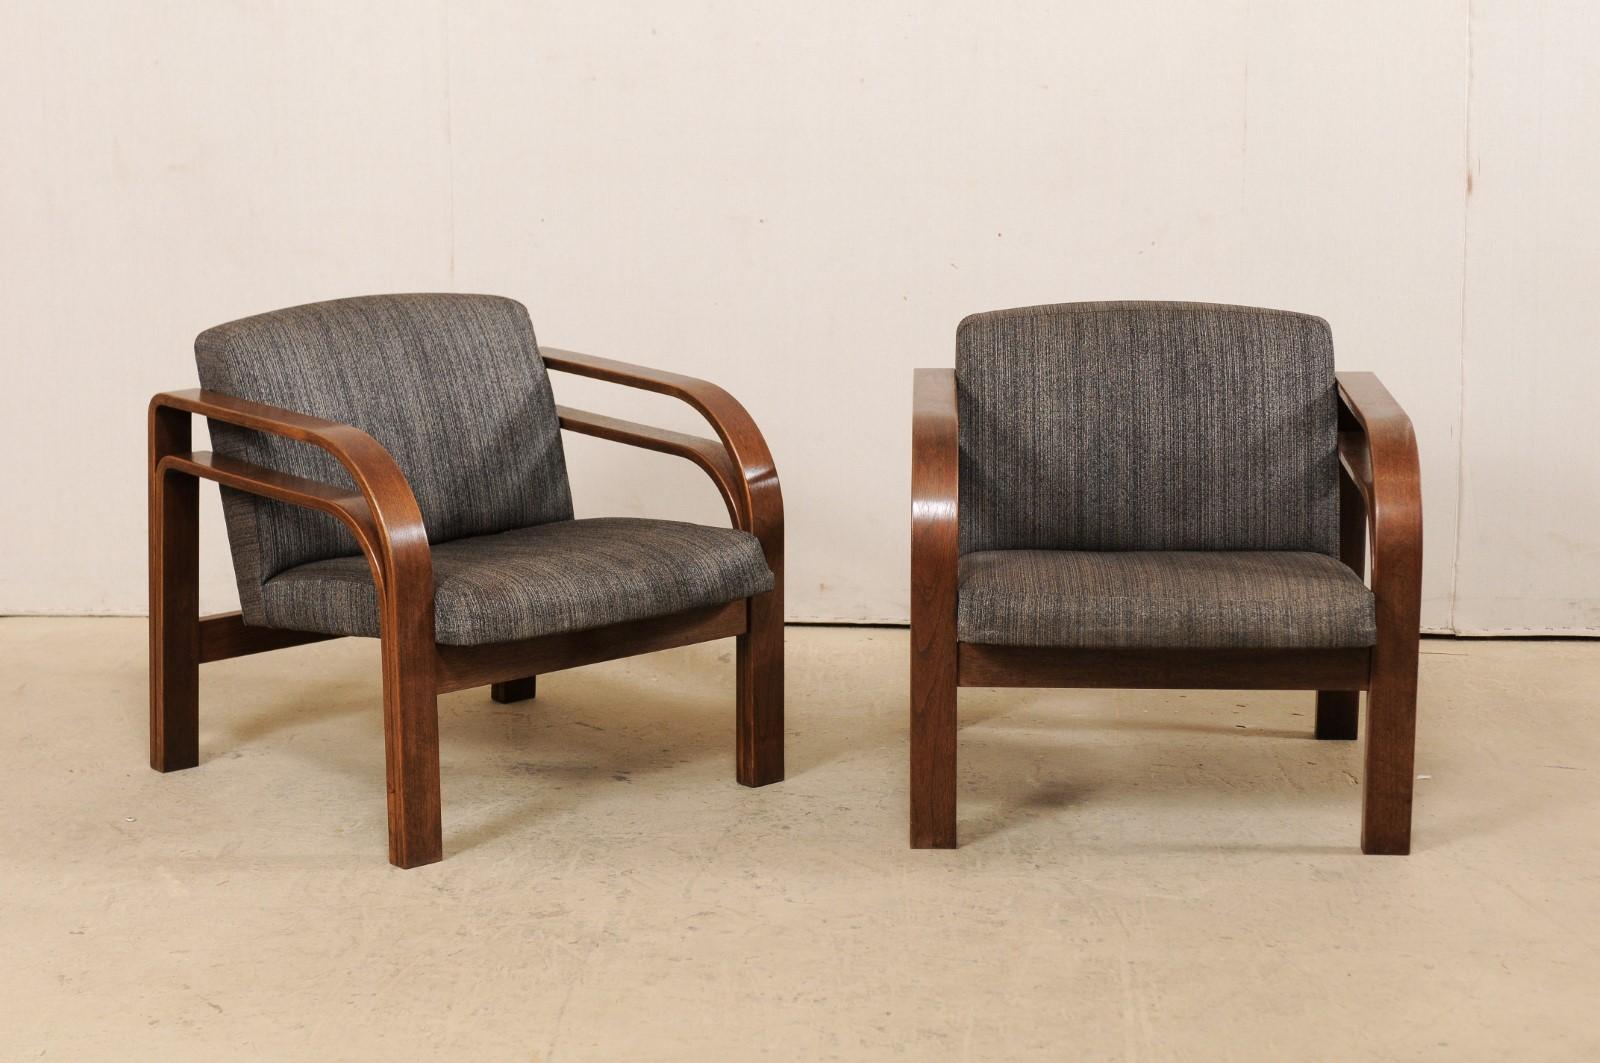 A French pair of bent-wood double armchairs, with upholstered seat and back, from the mid-20th century. This midcentury pair of occasional chairs from France each feature a pair of beautifully bowed, bent-wood arms a each side, one atop the other,